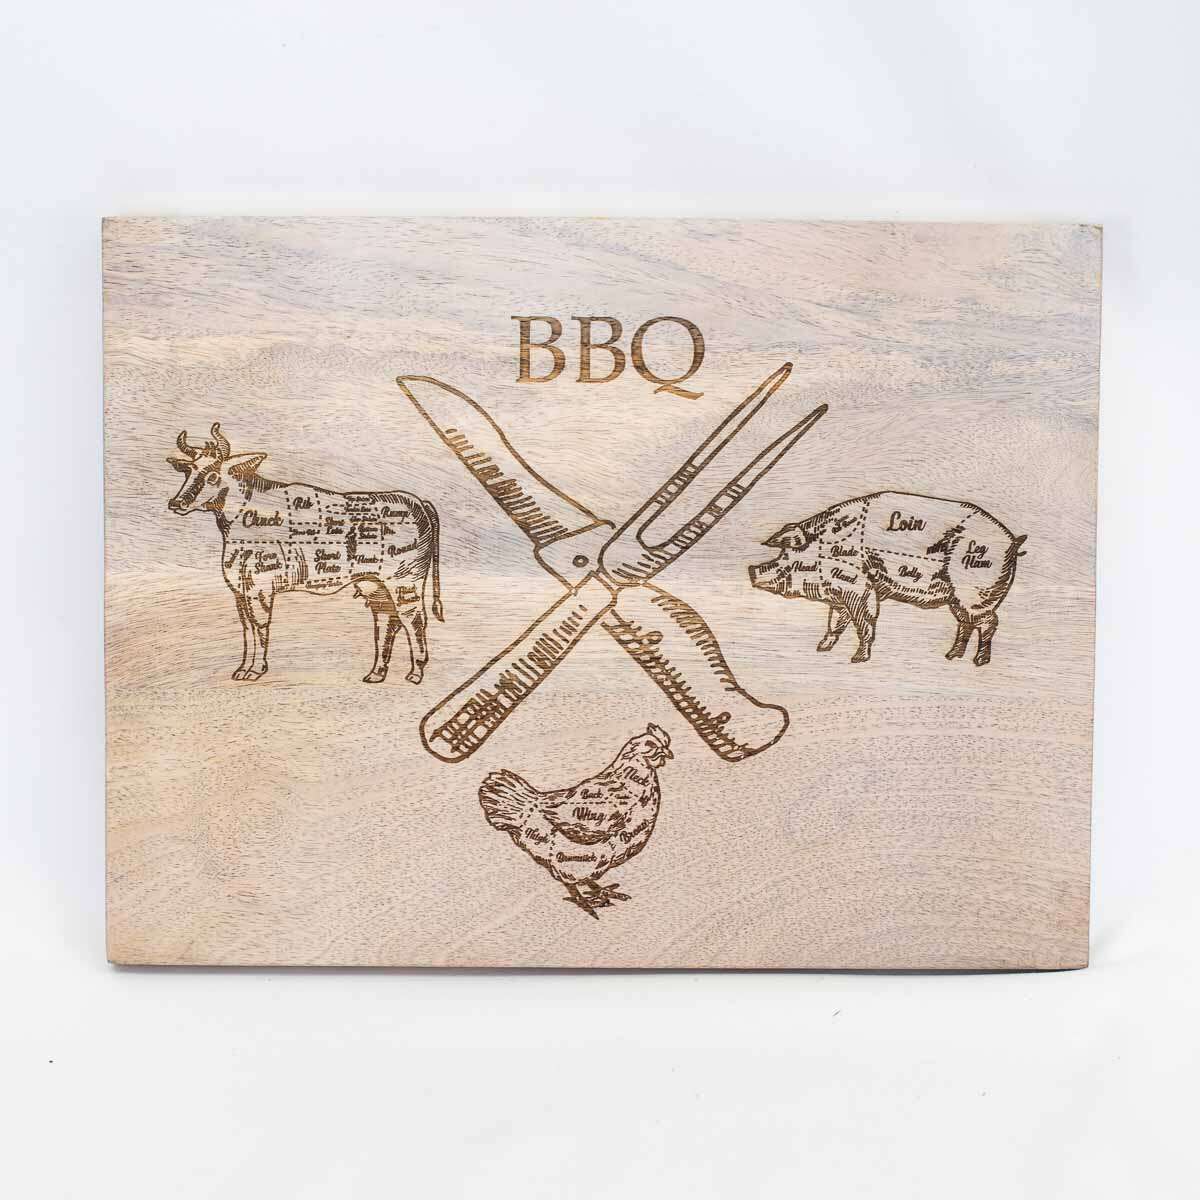 Home- The Royal Standard BBQ Crest Serving Board